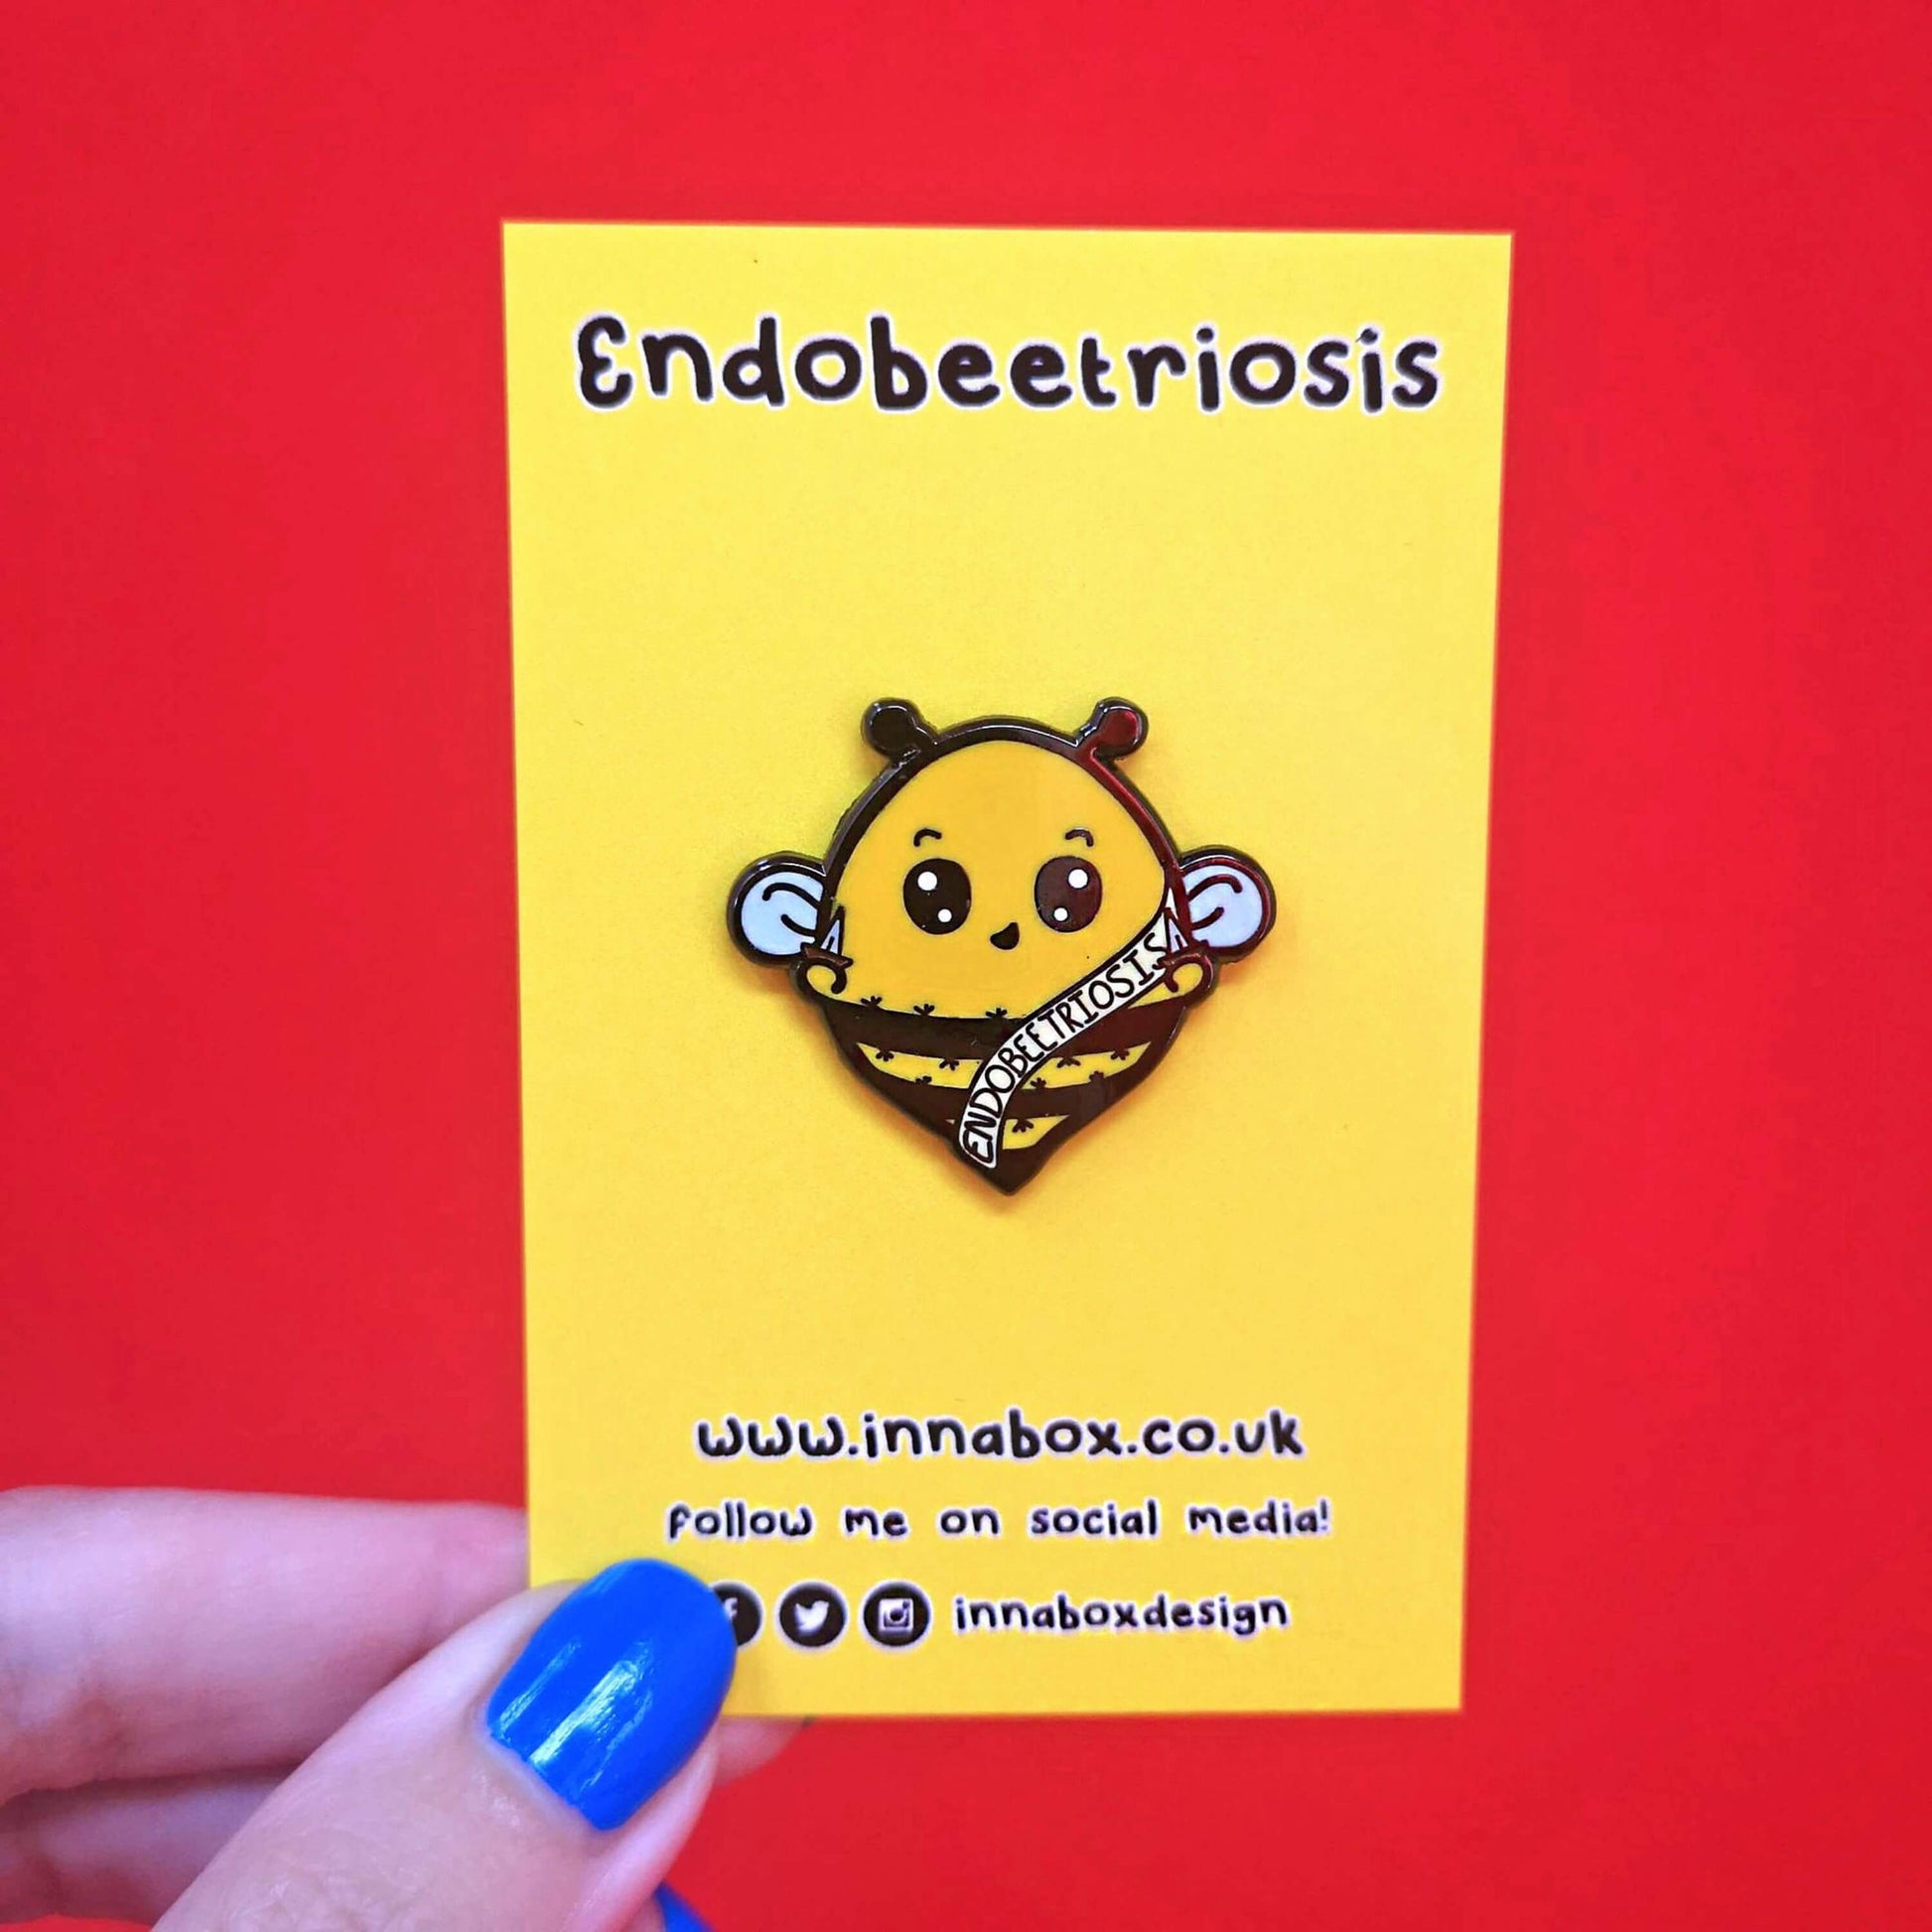 Endobeetriosis Enamel Pin - Endometriosis on yellow backing card on a red background. The enamel pin is a bumble bee with a smiley face and holding little daggers in its hands. The bee is wearing a white sash that has endobeetriosis written accross it. The enamel pin is designed to raise awareness for endometriosis